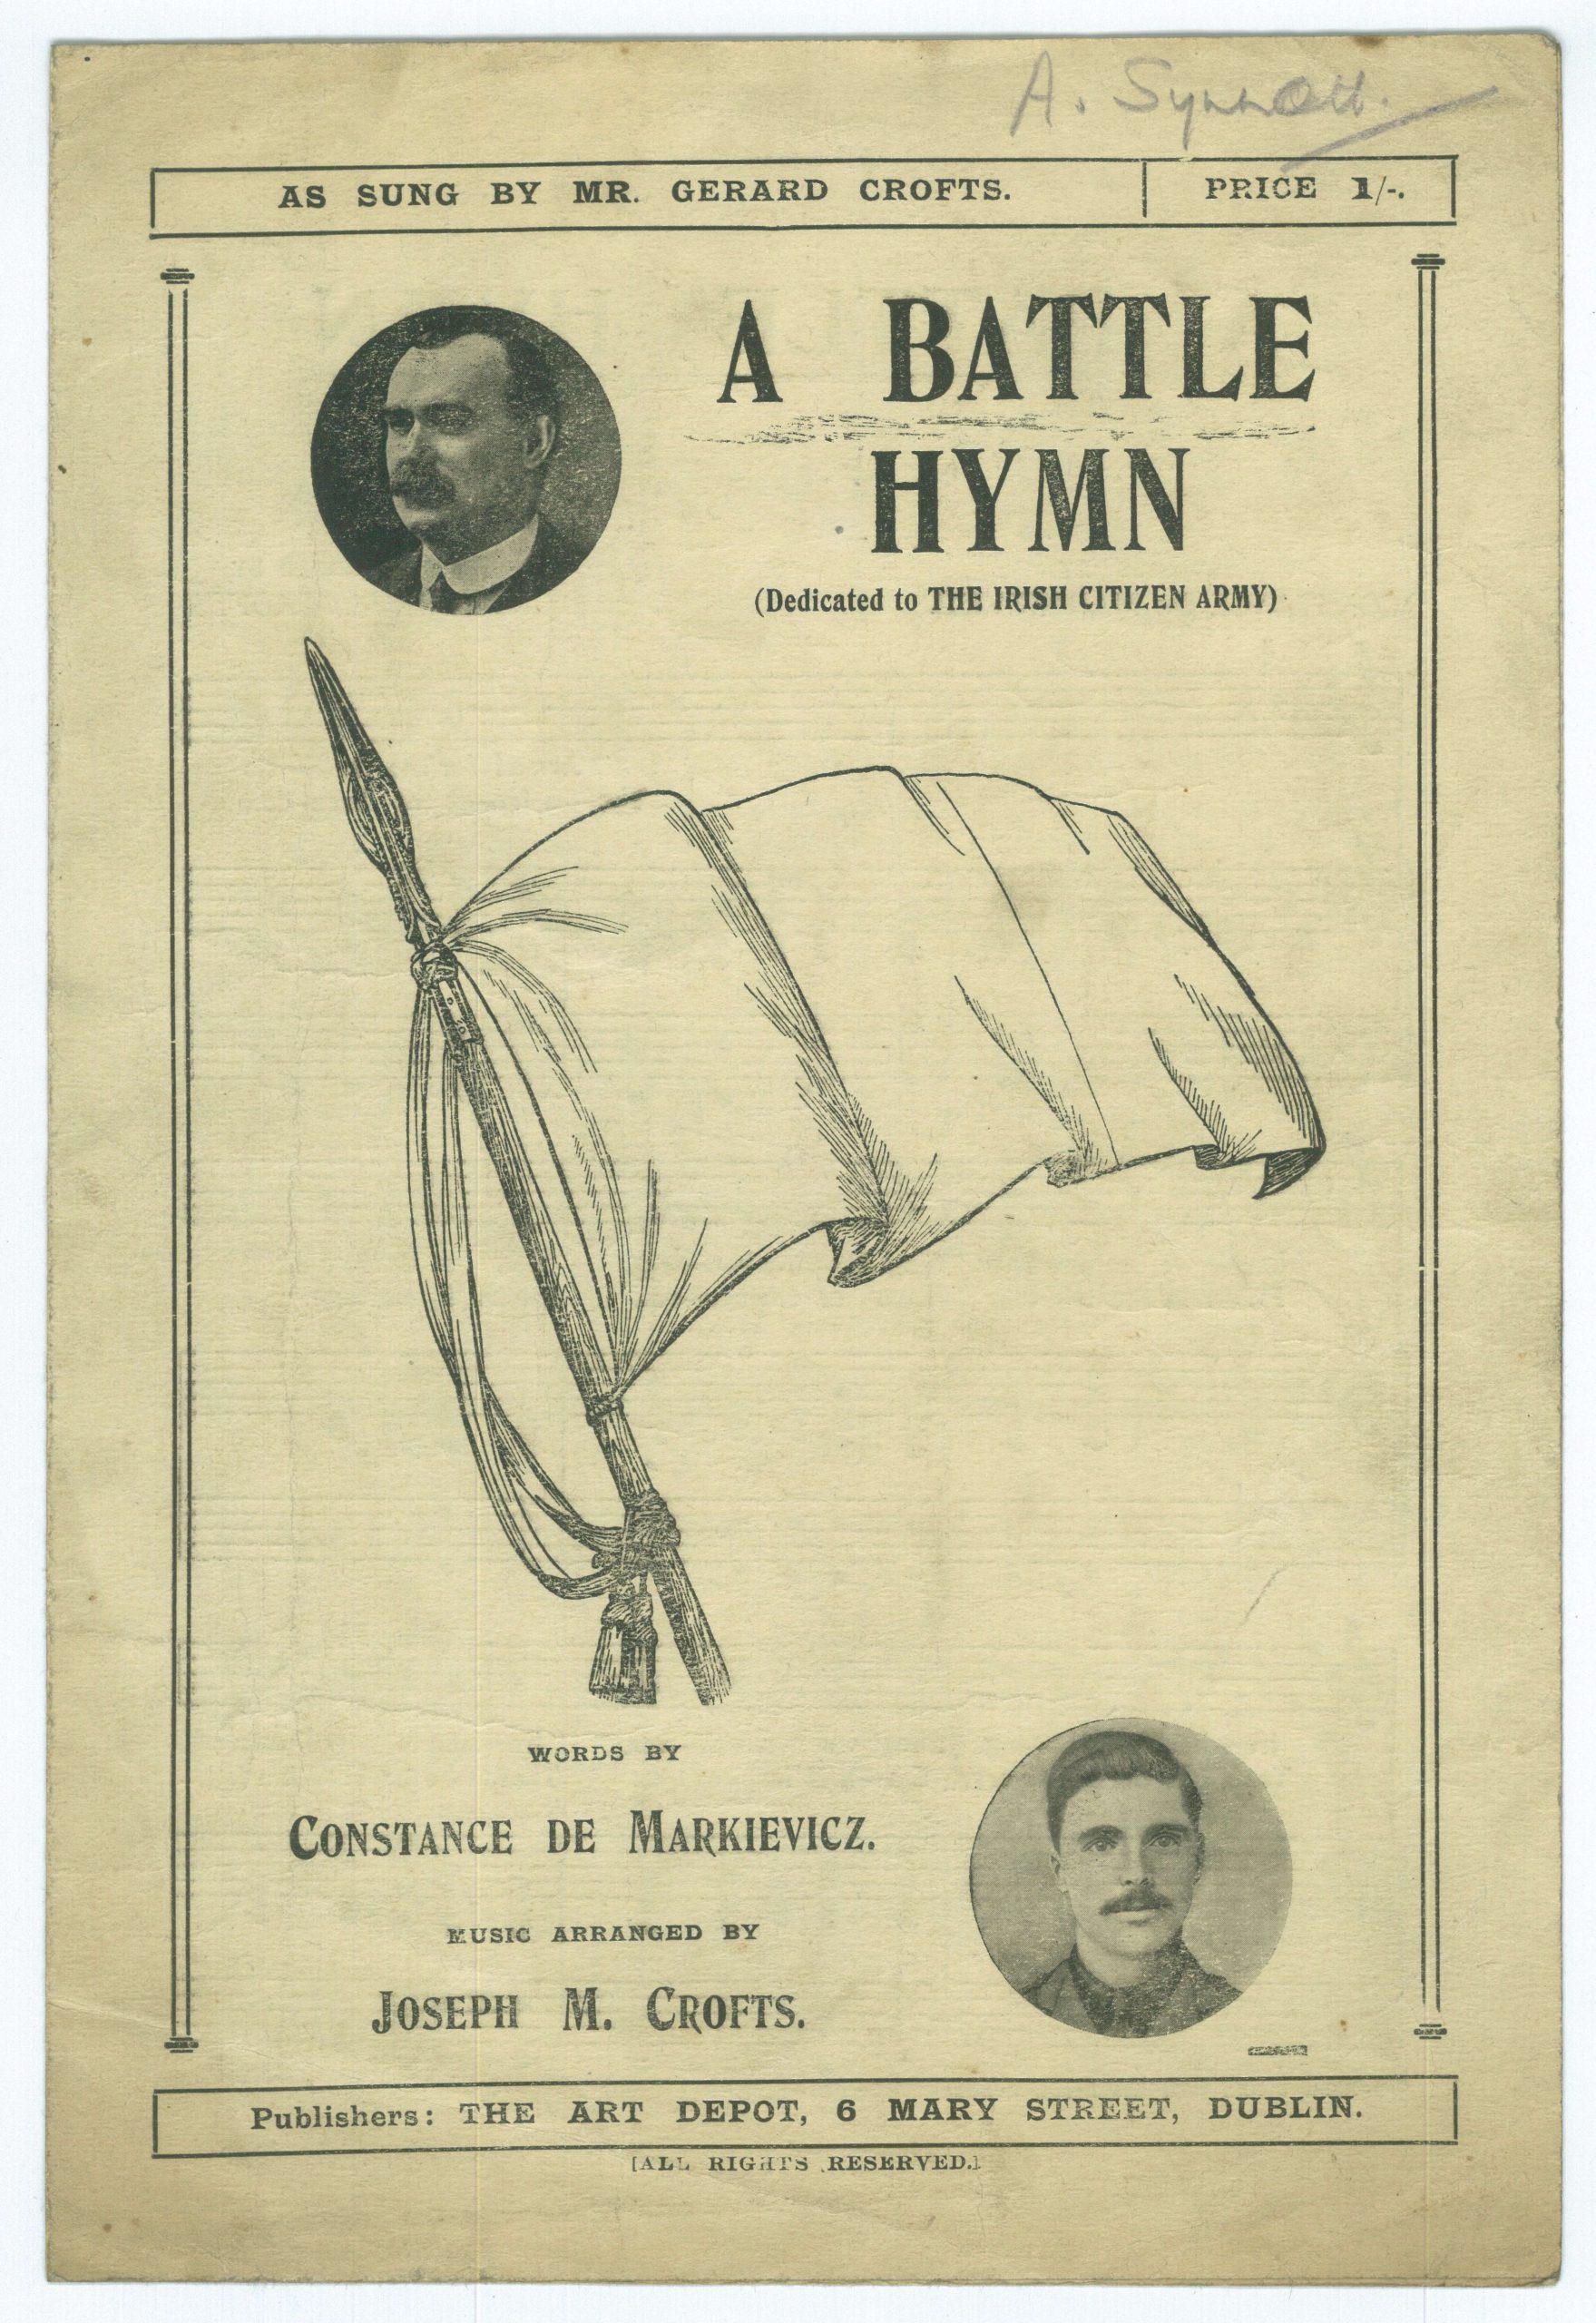 ‘A Battle Hymn’ Cover, Dedicated to the ICA. Words by Constance de Markievicz